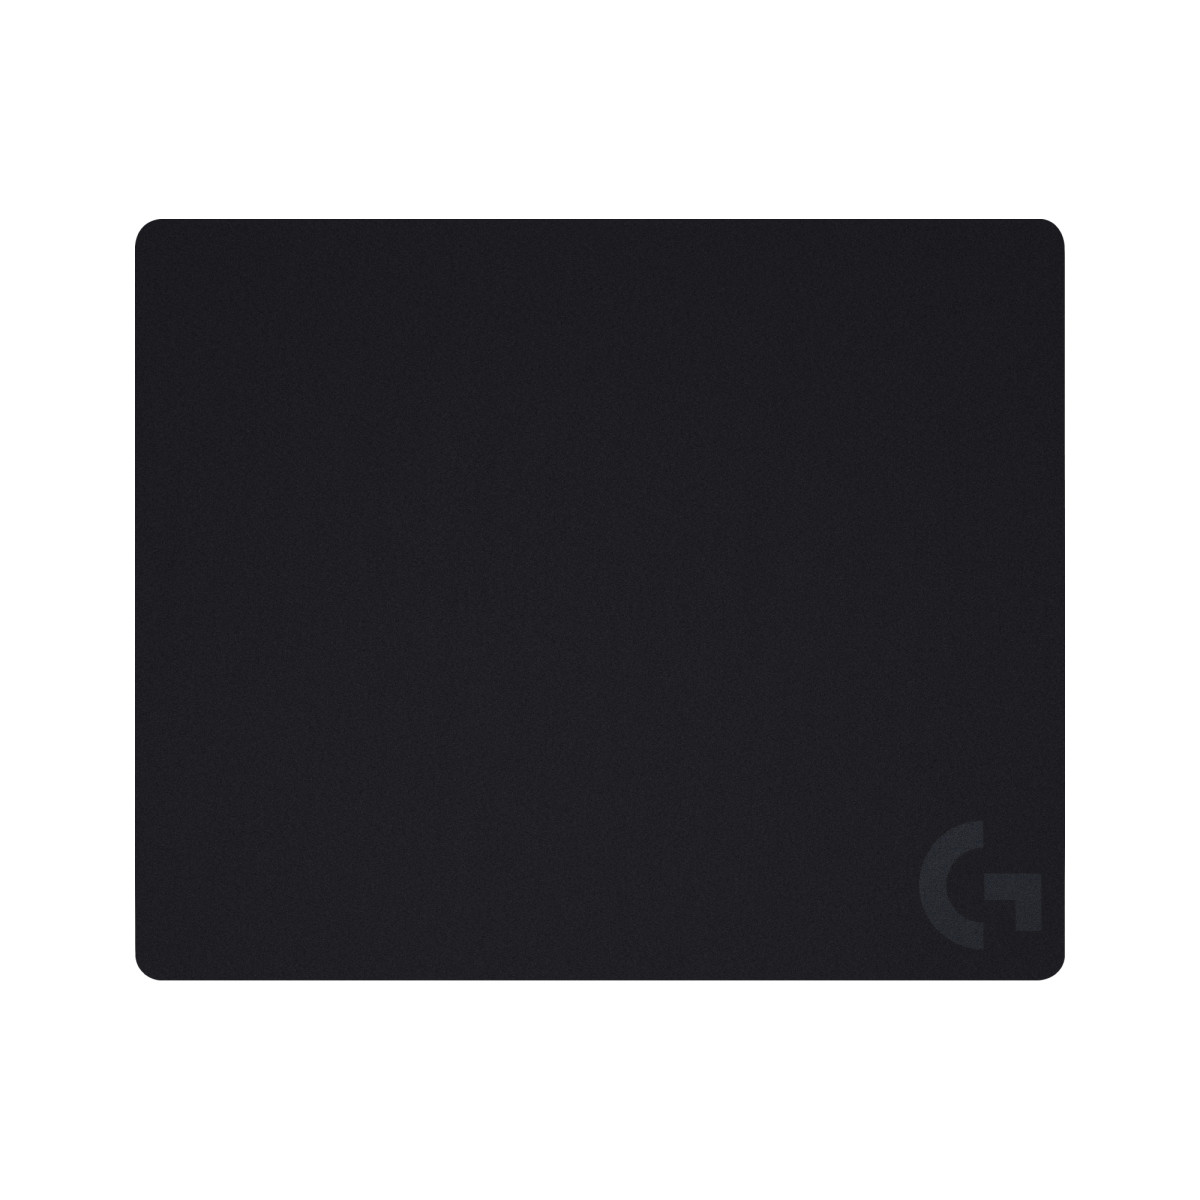 G440 Mouse Pad